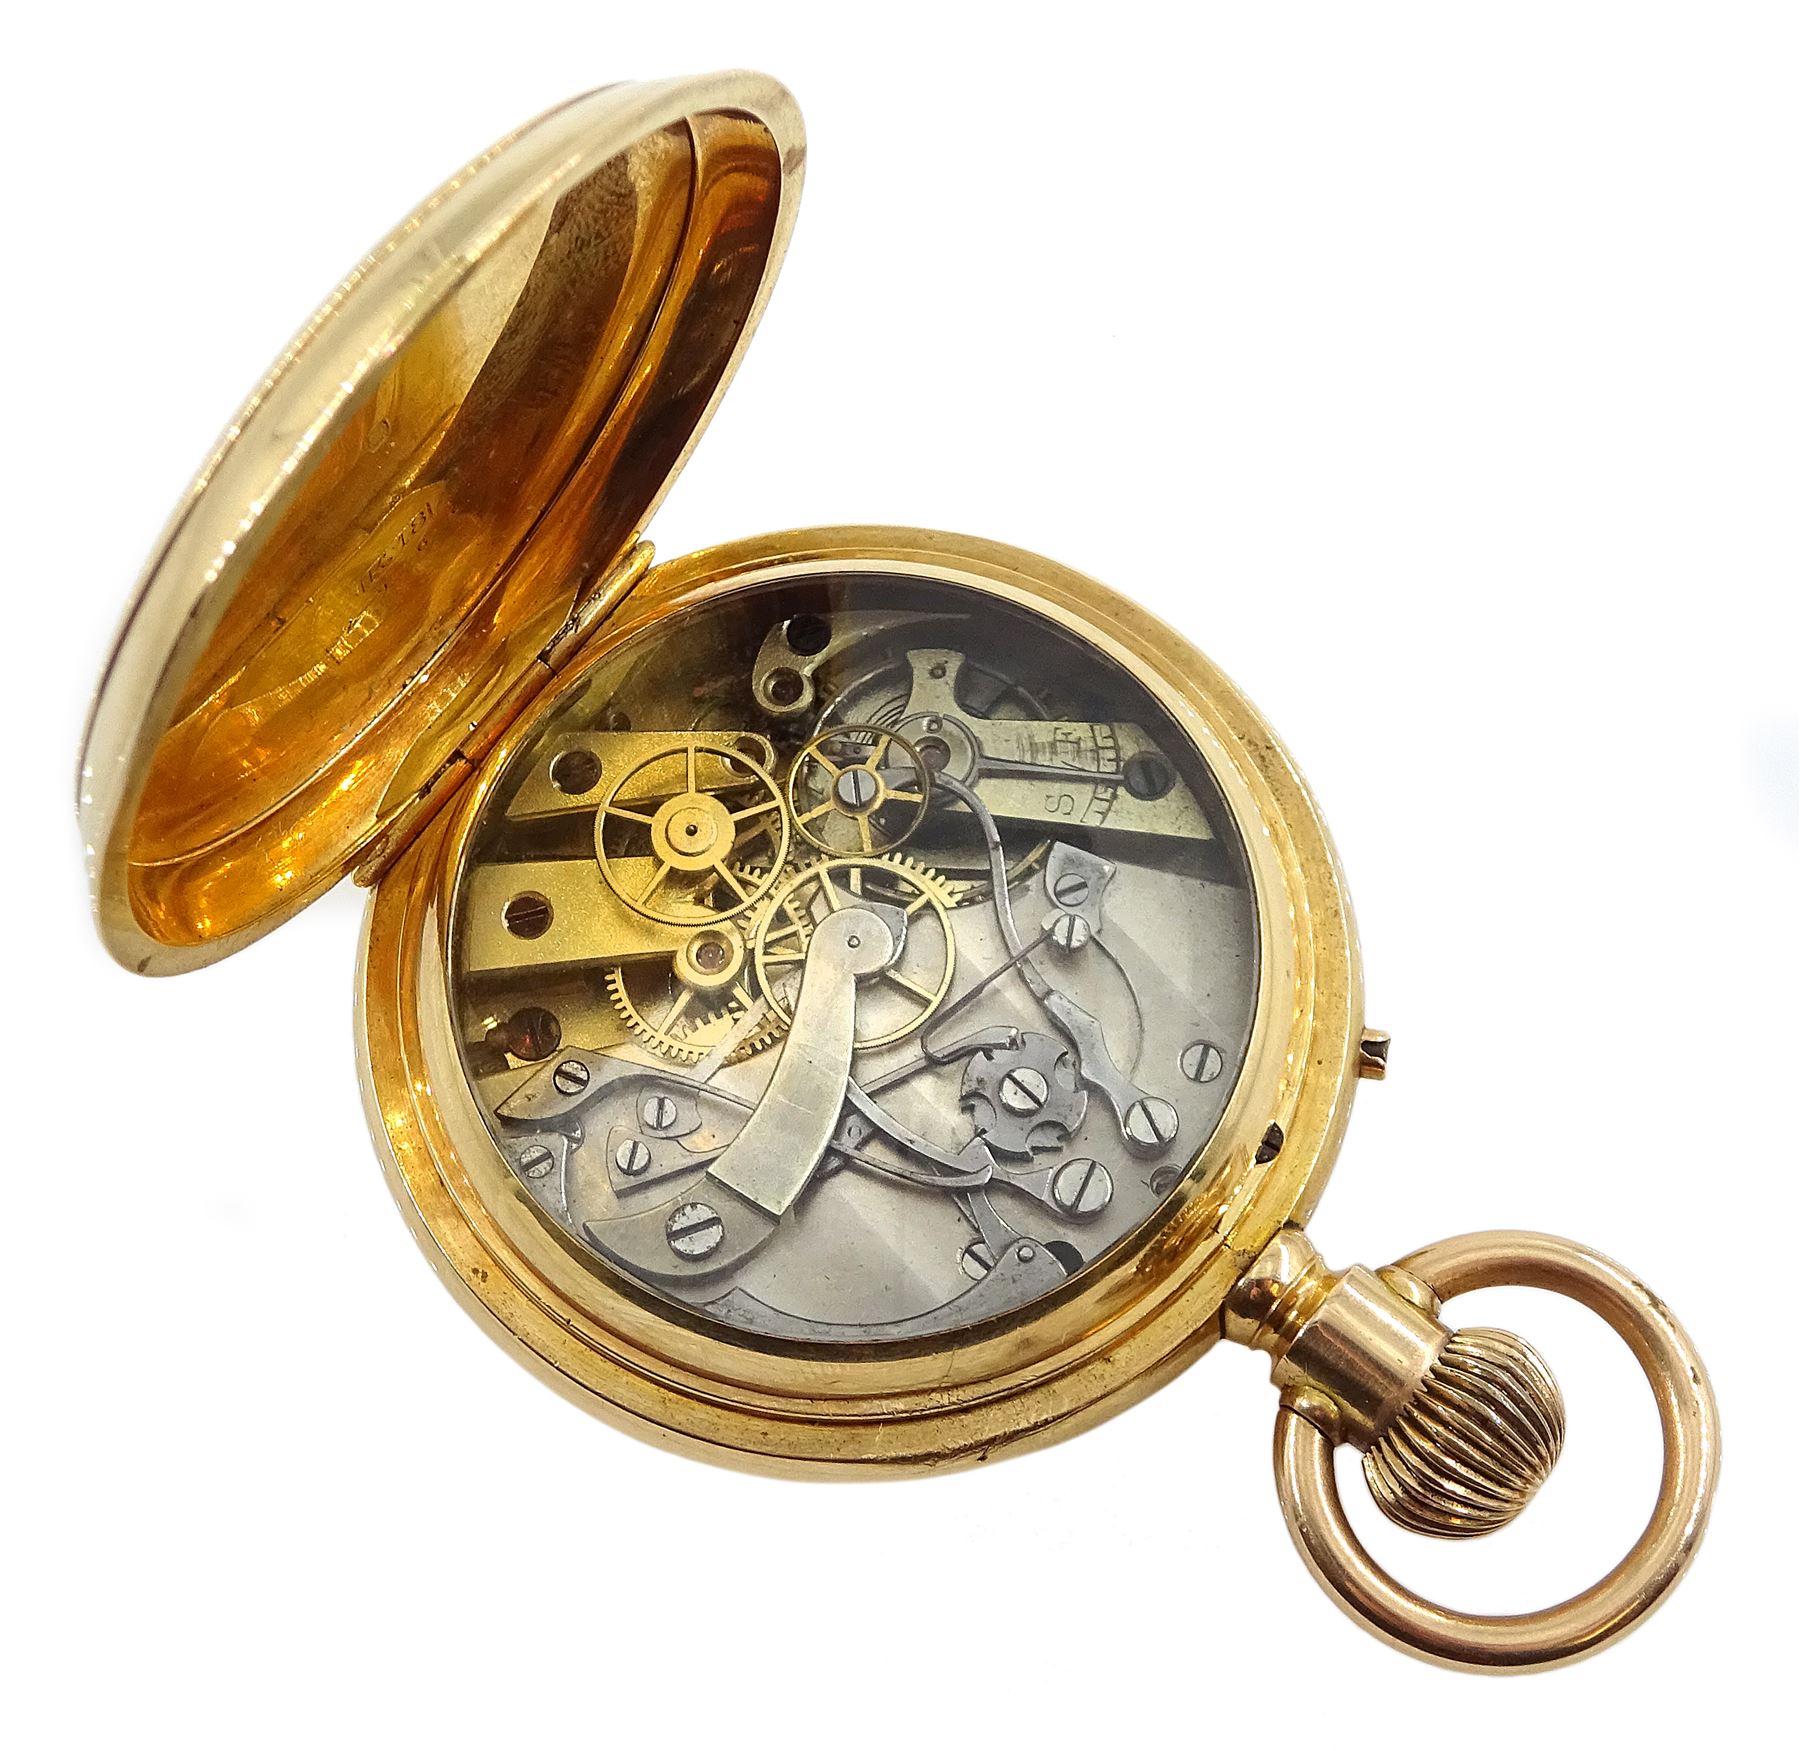 Swiss 18ct gold open face keyless lever chronograph pocket watch, case No. 7967, skeleton dust cover - Image 3 of 4